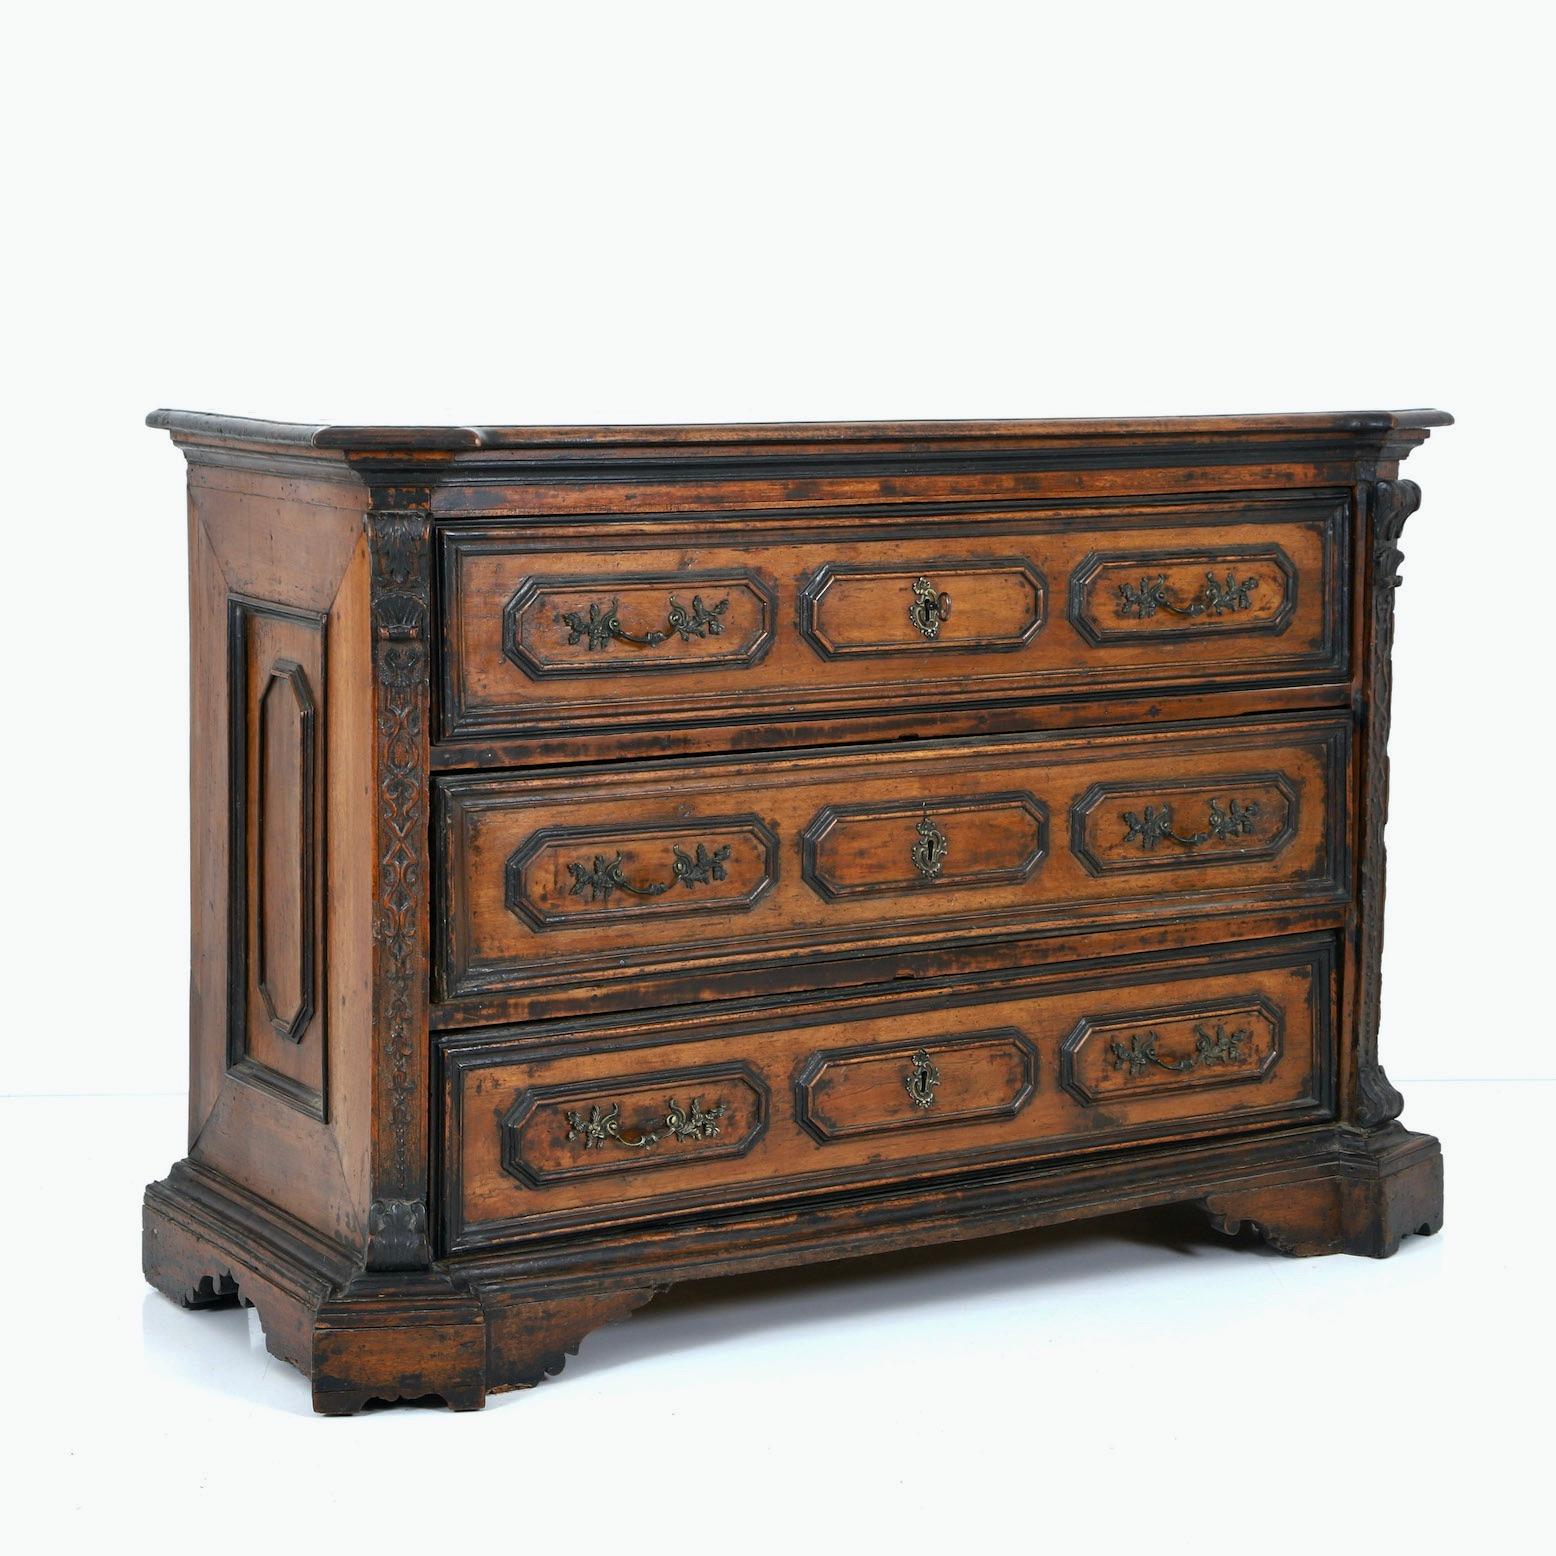 Vagabond antiques presents an 18th century Italian commode

Italy, Tuscany, Circa 1770

” This commode stands fantastically well, big scale, solid walnut throughout, perfectly patinated surface ” .

